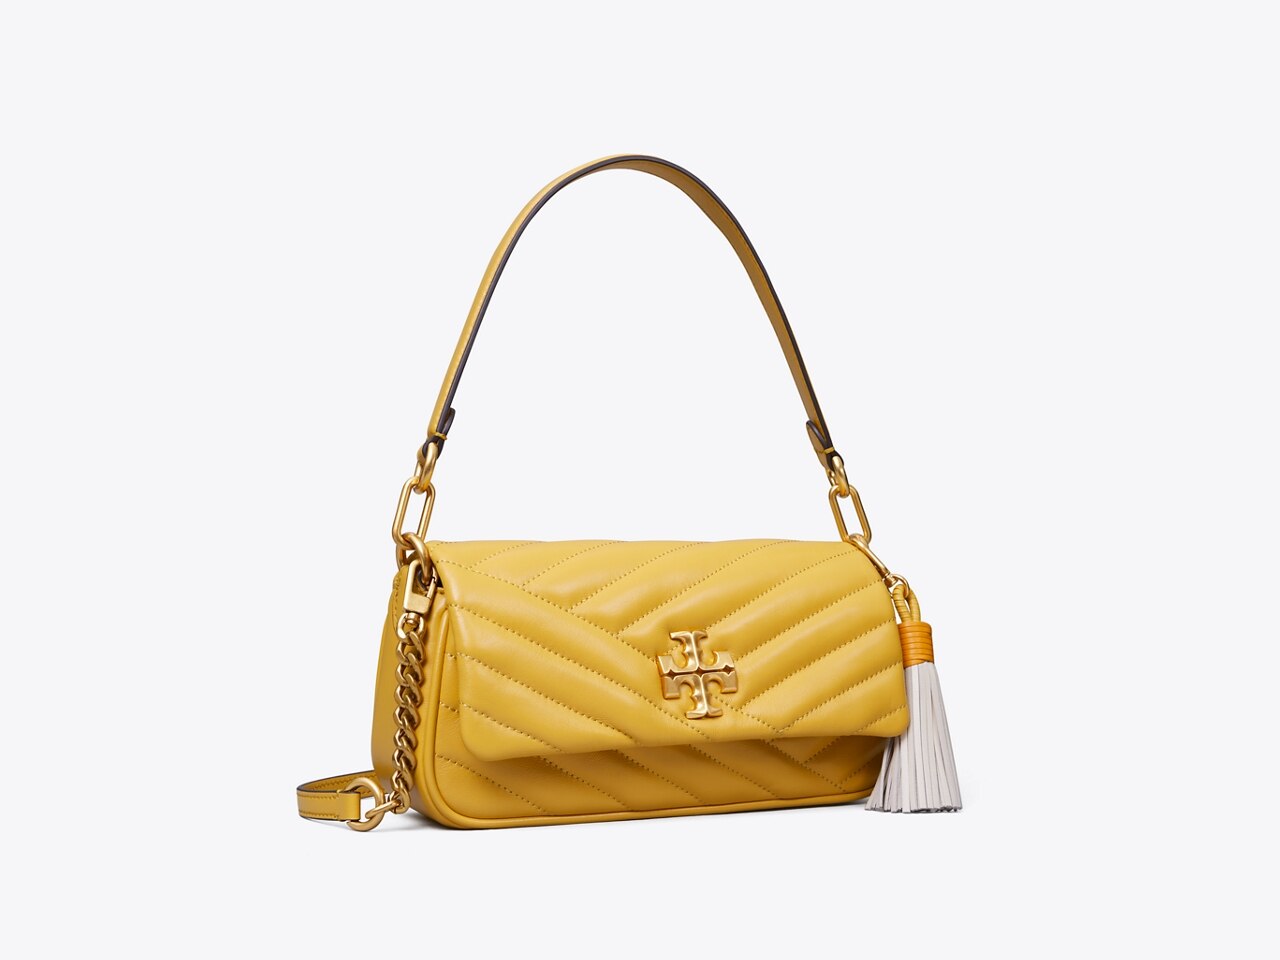 Tory Burch Tory Burch Mini Kira Flap Shoulder BagSession is about to end  298.00